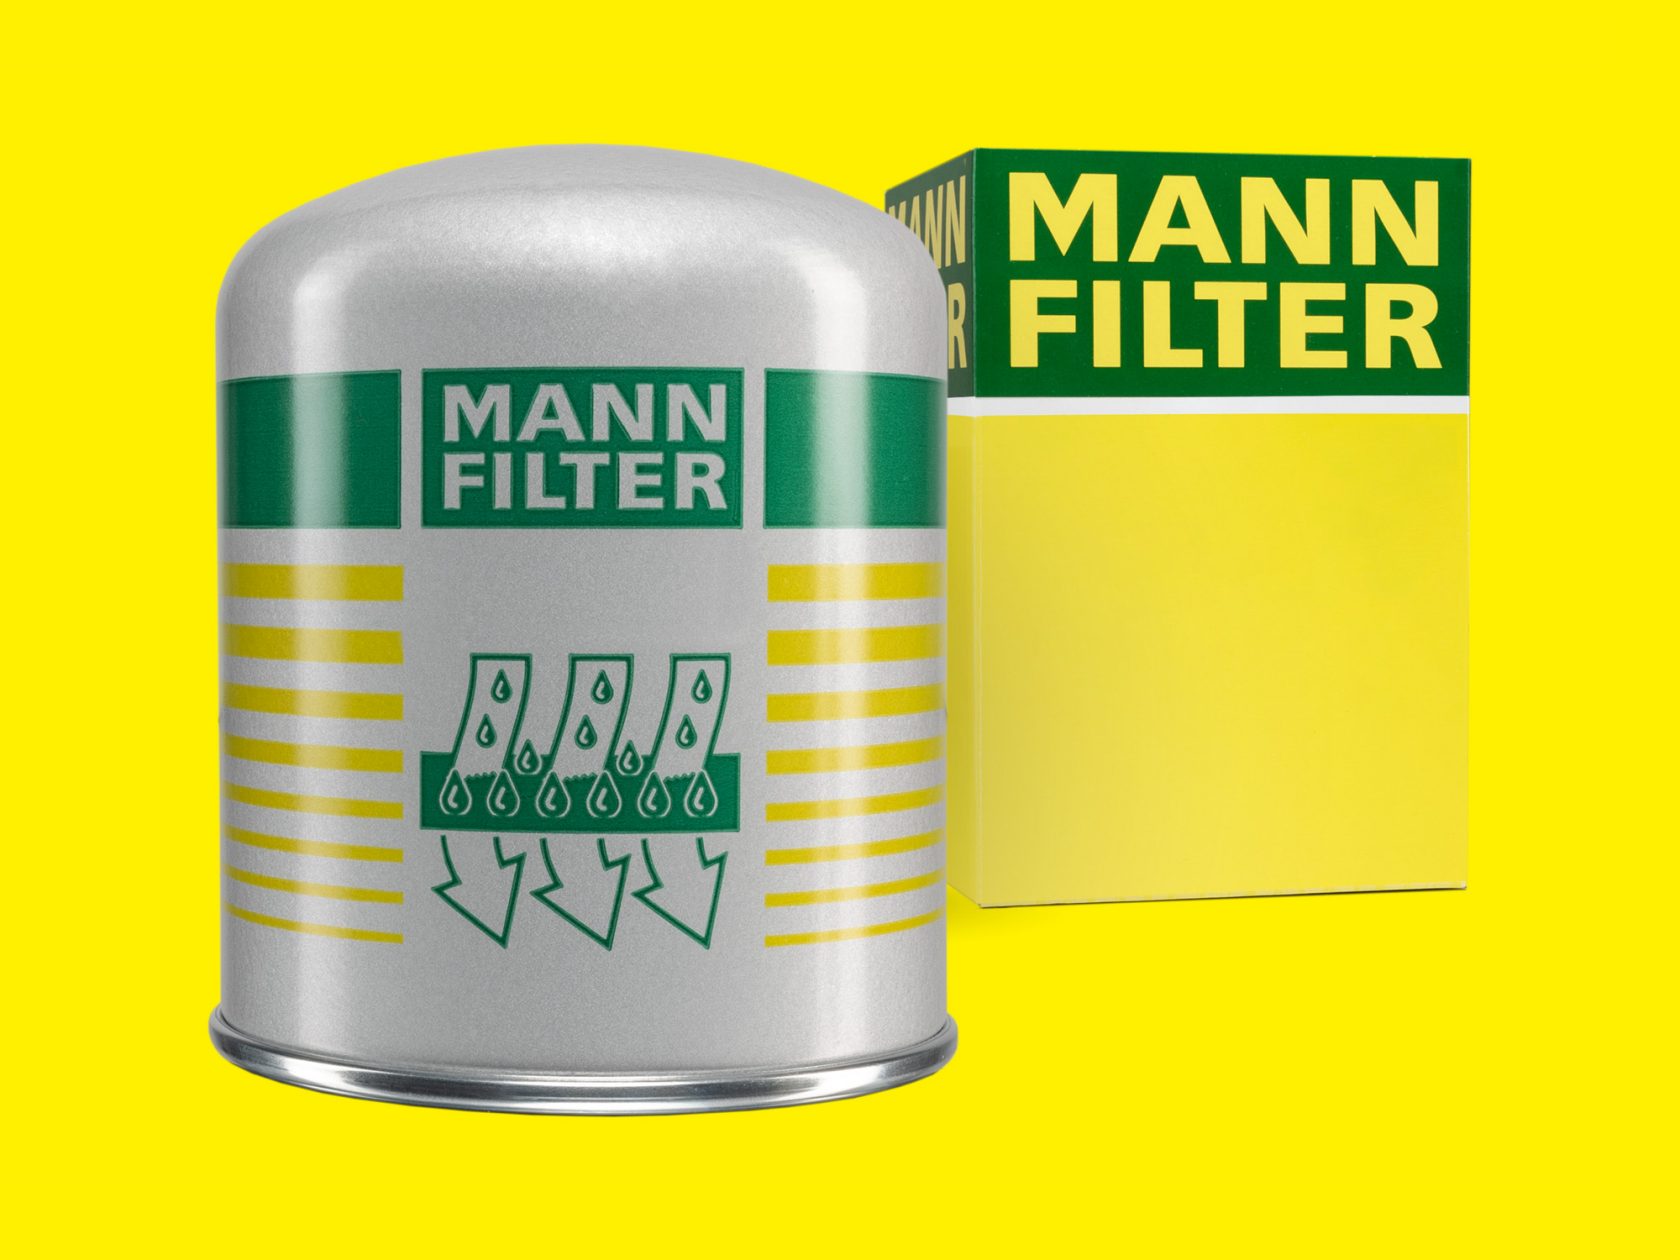 MANN-FILTER air dryer cartridges dehumidify compressed air and protect compressed air systems